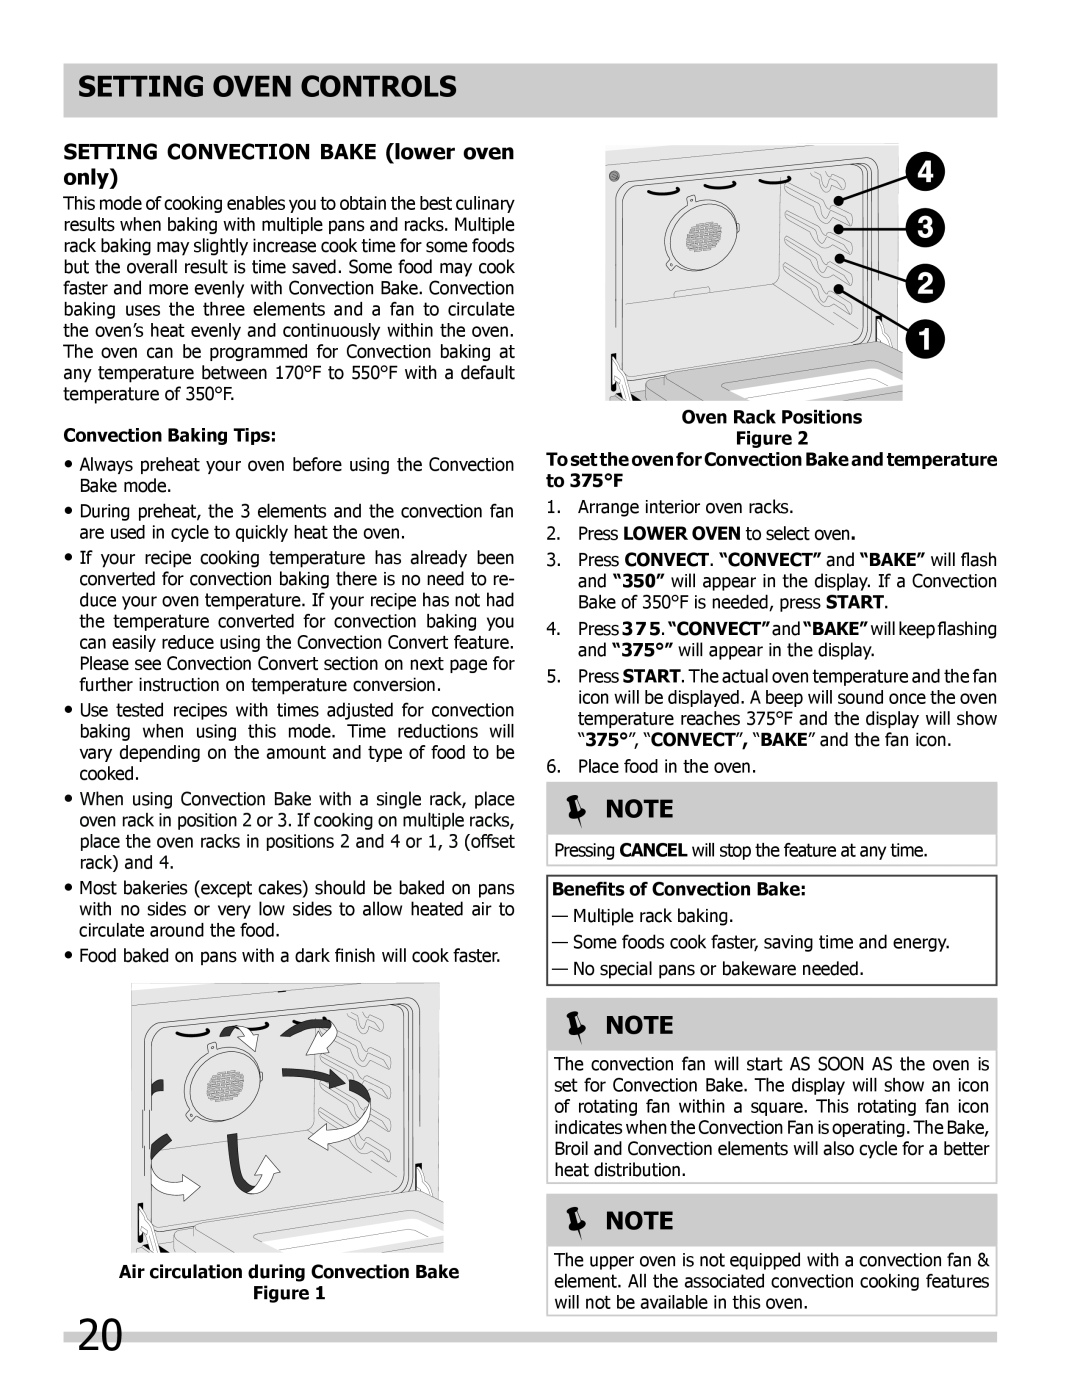 Frigidaire 318205204 Setting Oven Controls, Setting Convection Bake lower oven only, Convection Baking Tips, 4 3, Note 